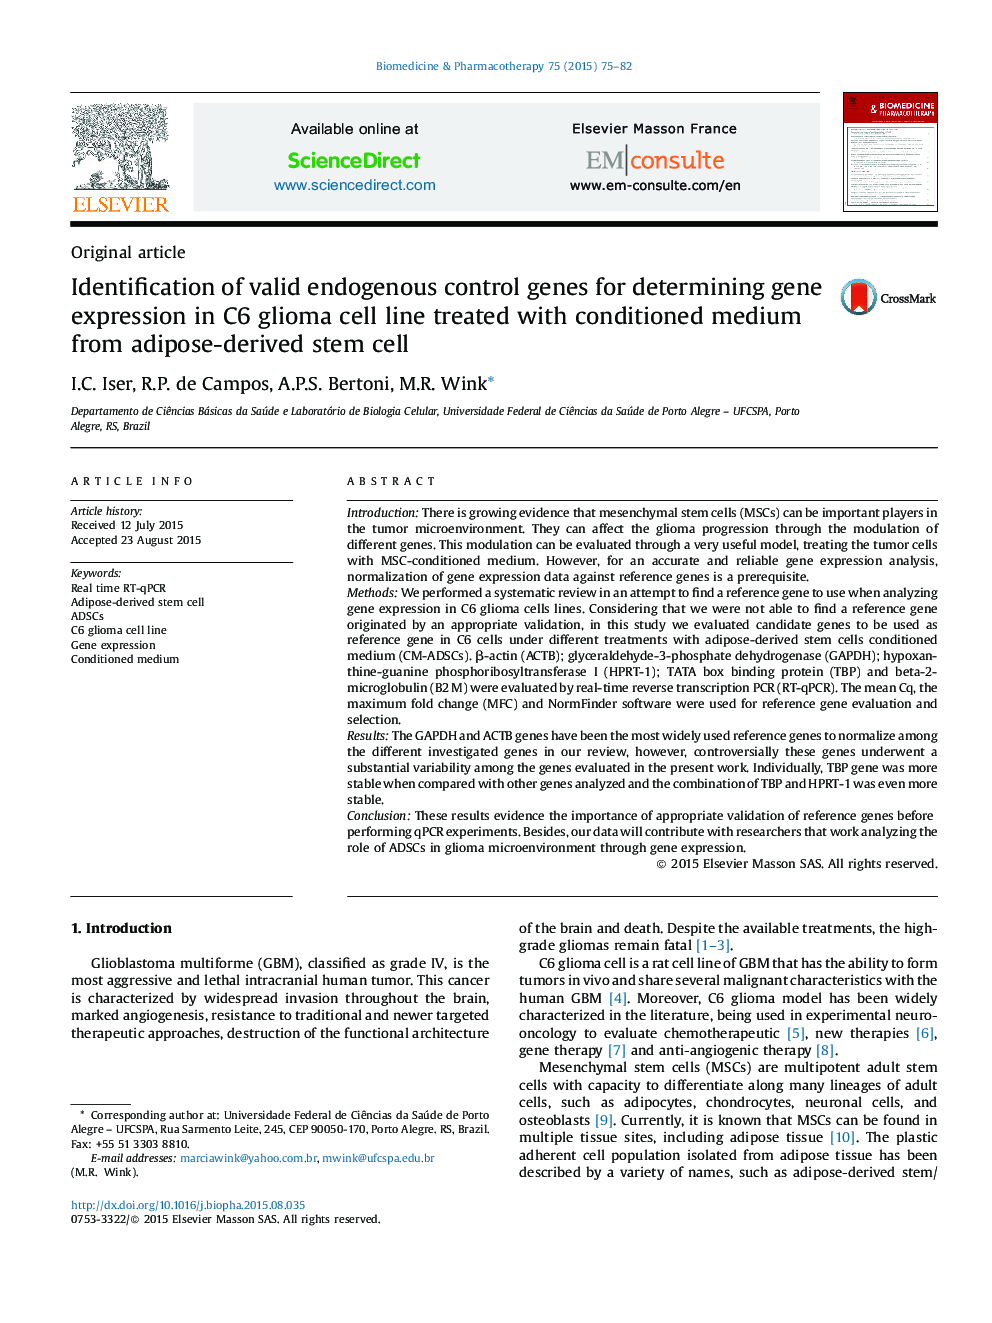 Identification of valid endogenous control genes for determining gene expression in C6 glioma cell line treated with conditioned medium from adipose-derived stem cell